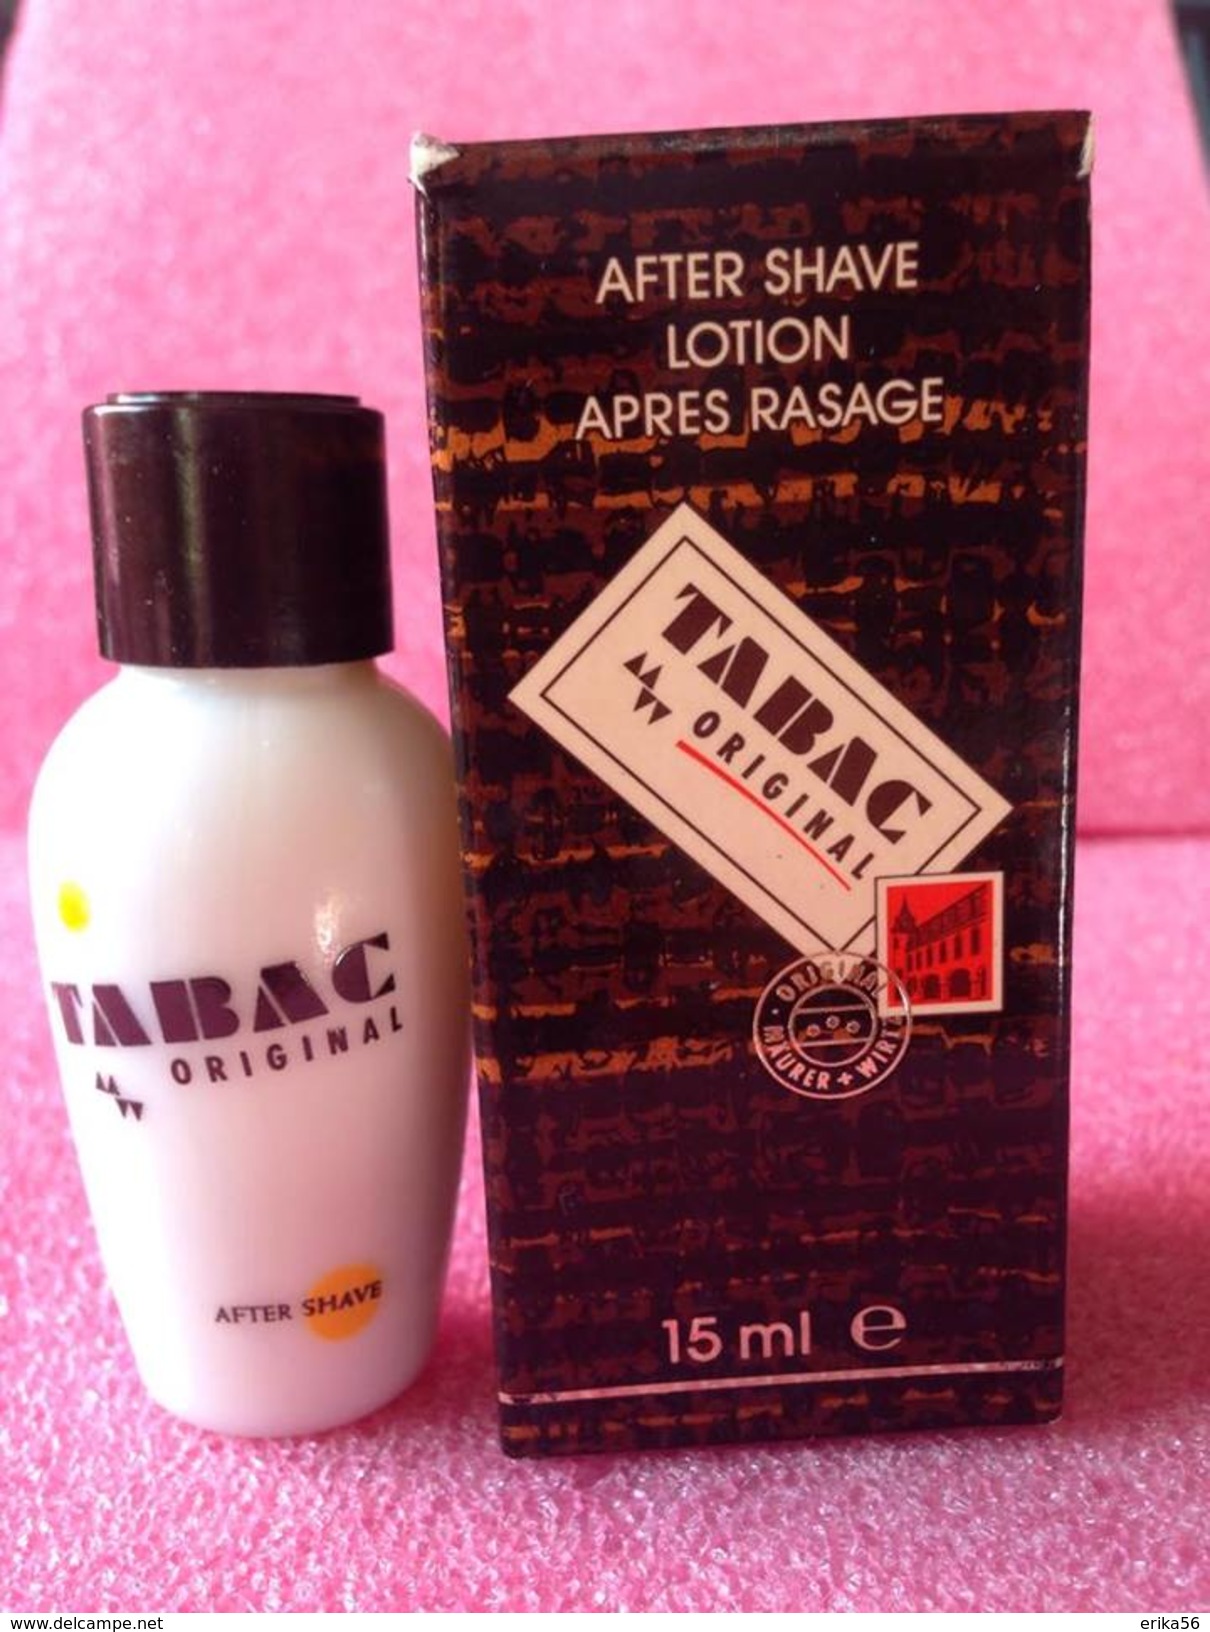 TABAC ORIGINAL   AFTER SHAVE LOTION  15 ML - Miniatures Men's Fragrances (in Box)